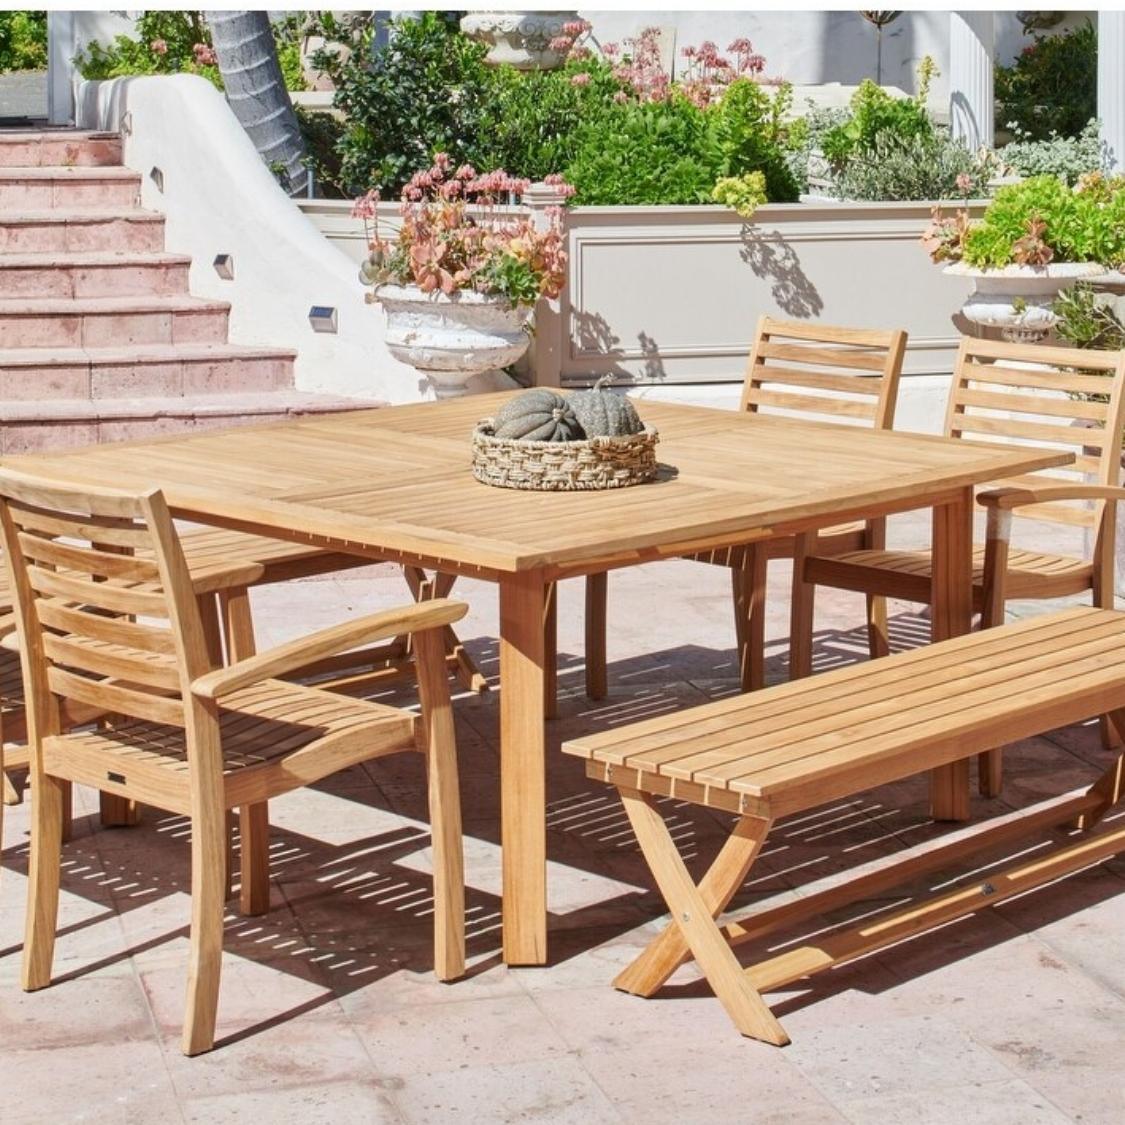 LOOMLAN Outdoor - Hamilton Square Teak Outdoor Dining Table with Umbrella Hole - Outdoor Dining Tables